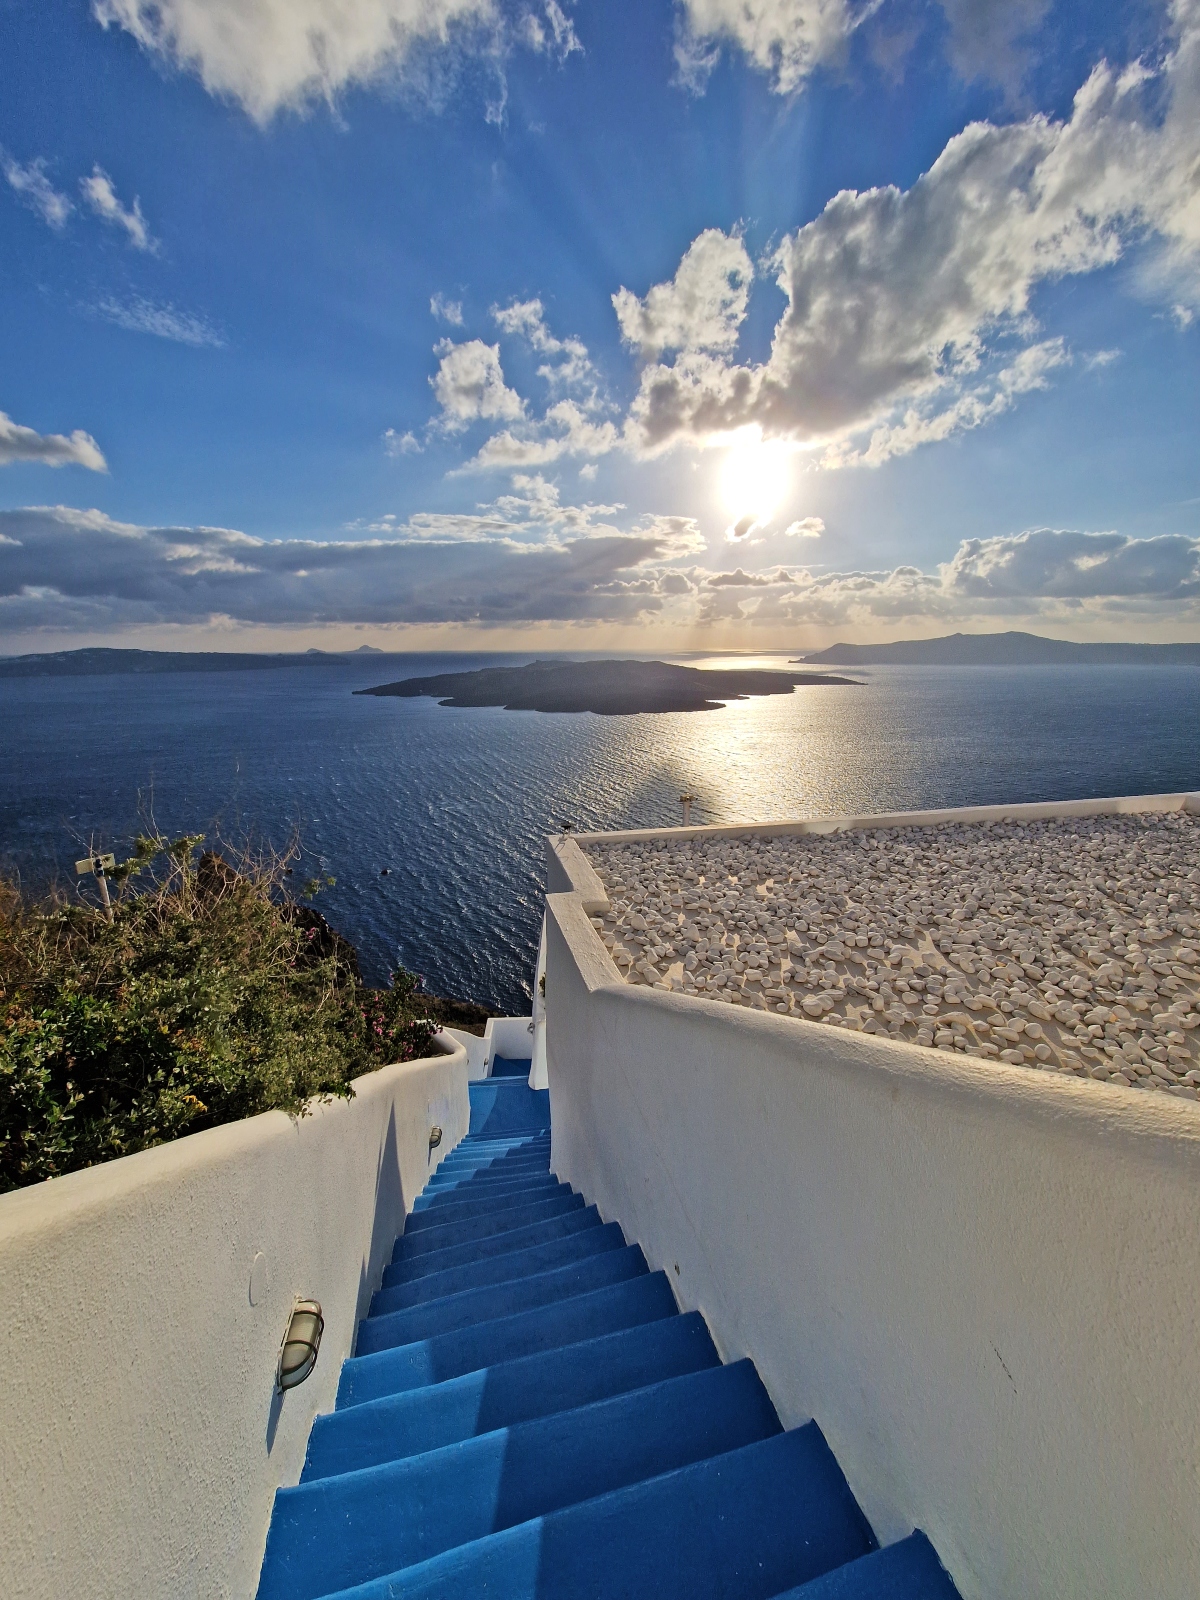 A view of Santorini - A guide to island hopping in Greece